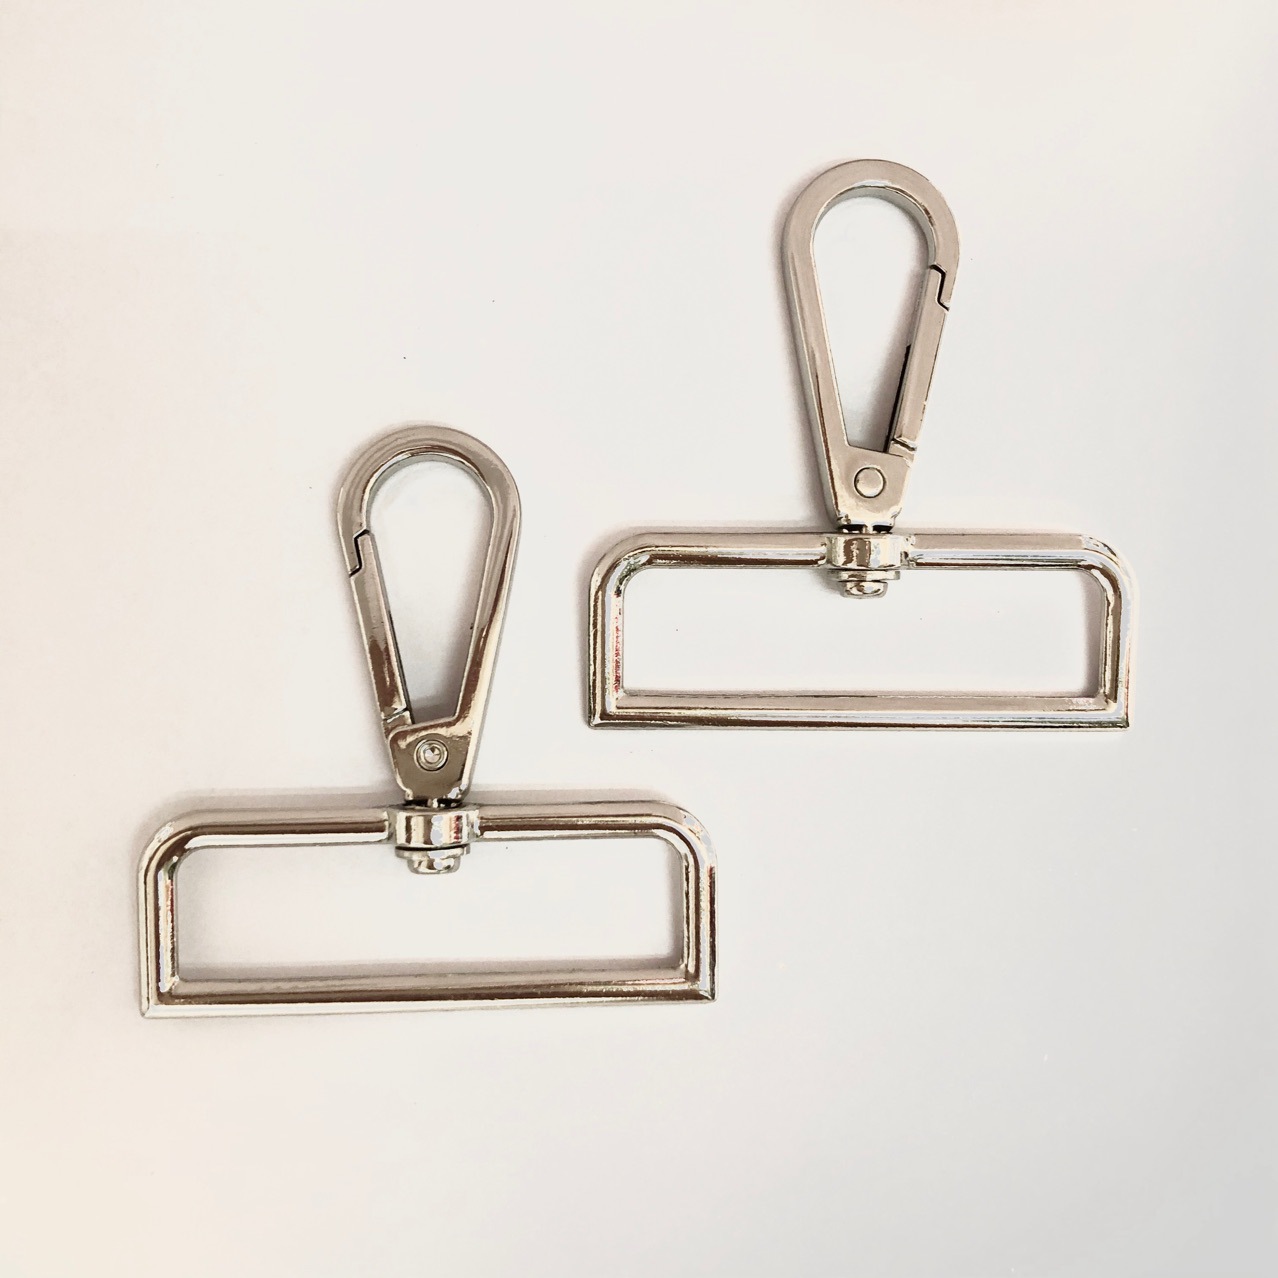 Manufactor goods in stock wholesale Luggage and luggage hardware parts diy originality Jewelry Dog buckle Pendant Hooks Plate buckle Key buckle